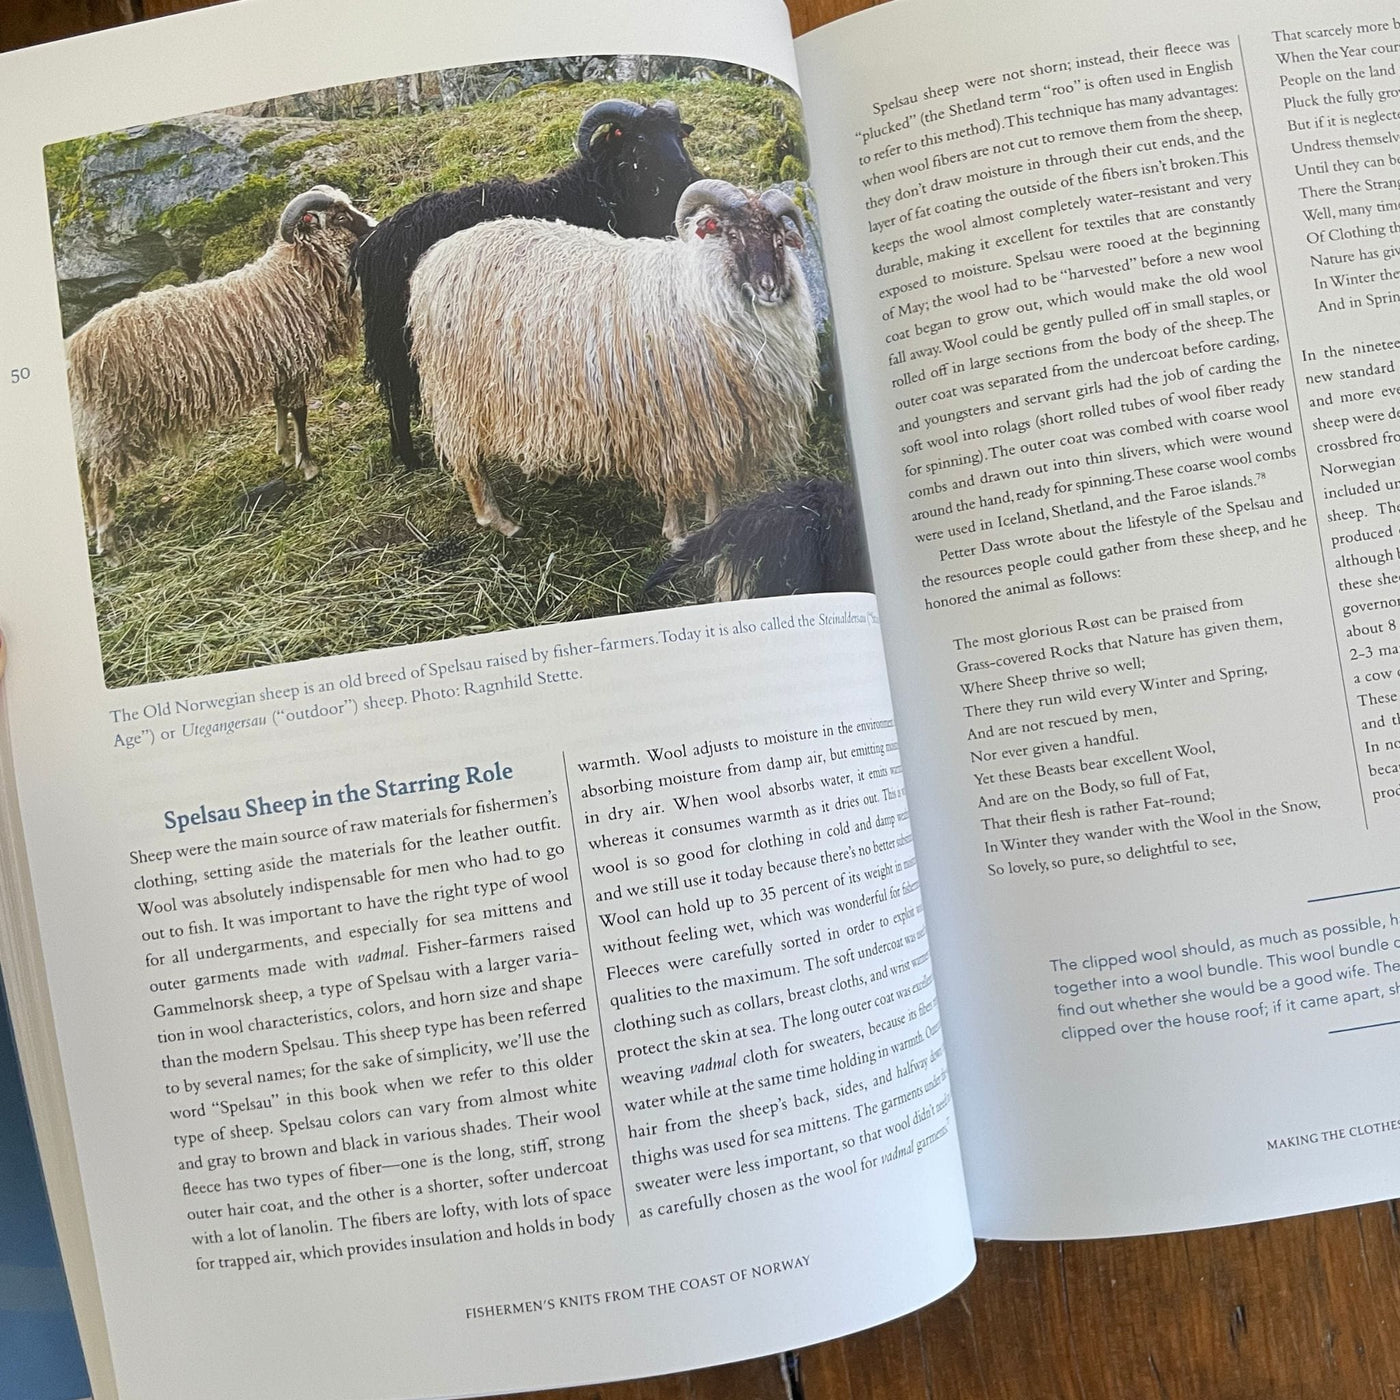 Inside pages of Fishermen's Knits from the Coast of Norway. Pages show a photo of sheep and article with heading "Spelsau Sheep in the Starring Role."